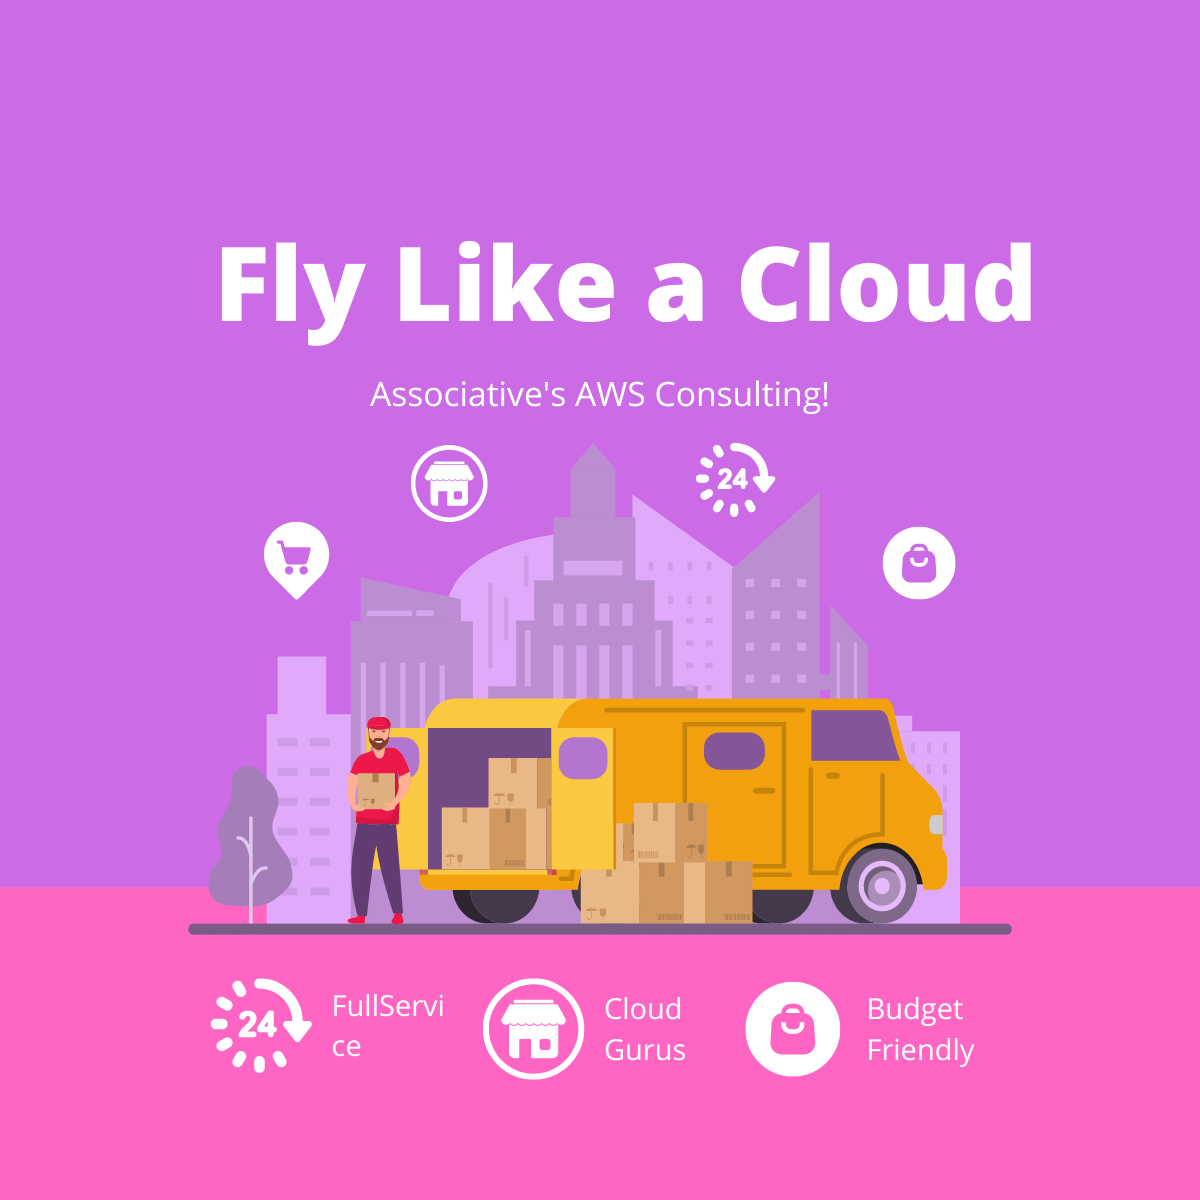 Pune Business, Fly Like a Cloud with Associative's AWS Consulting!